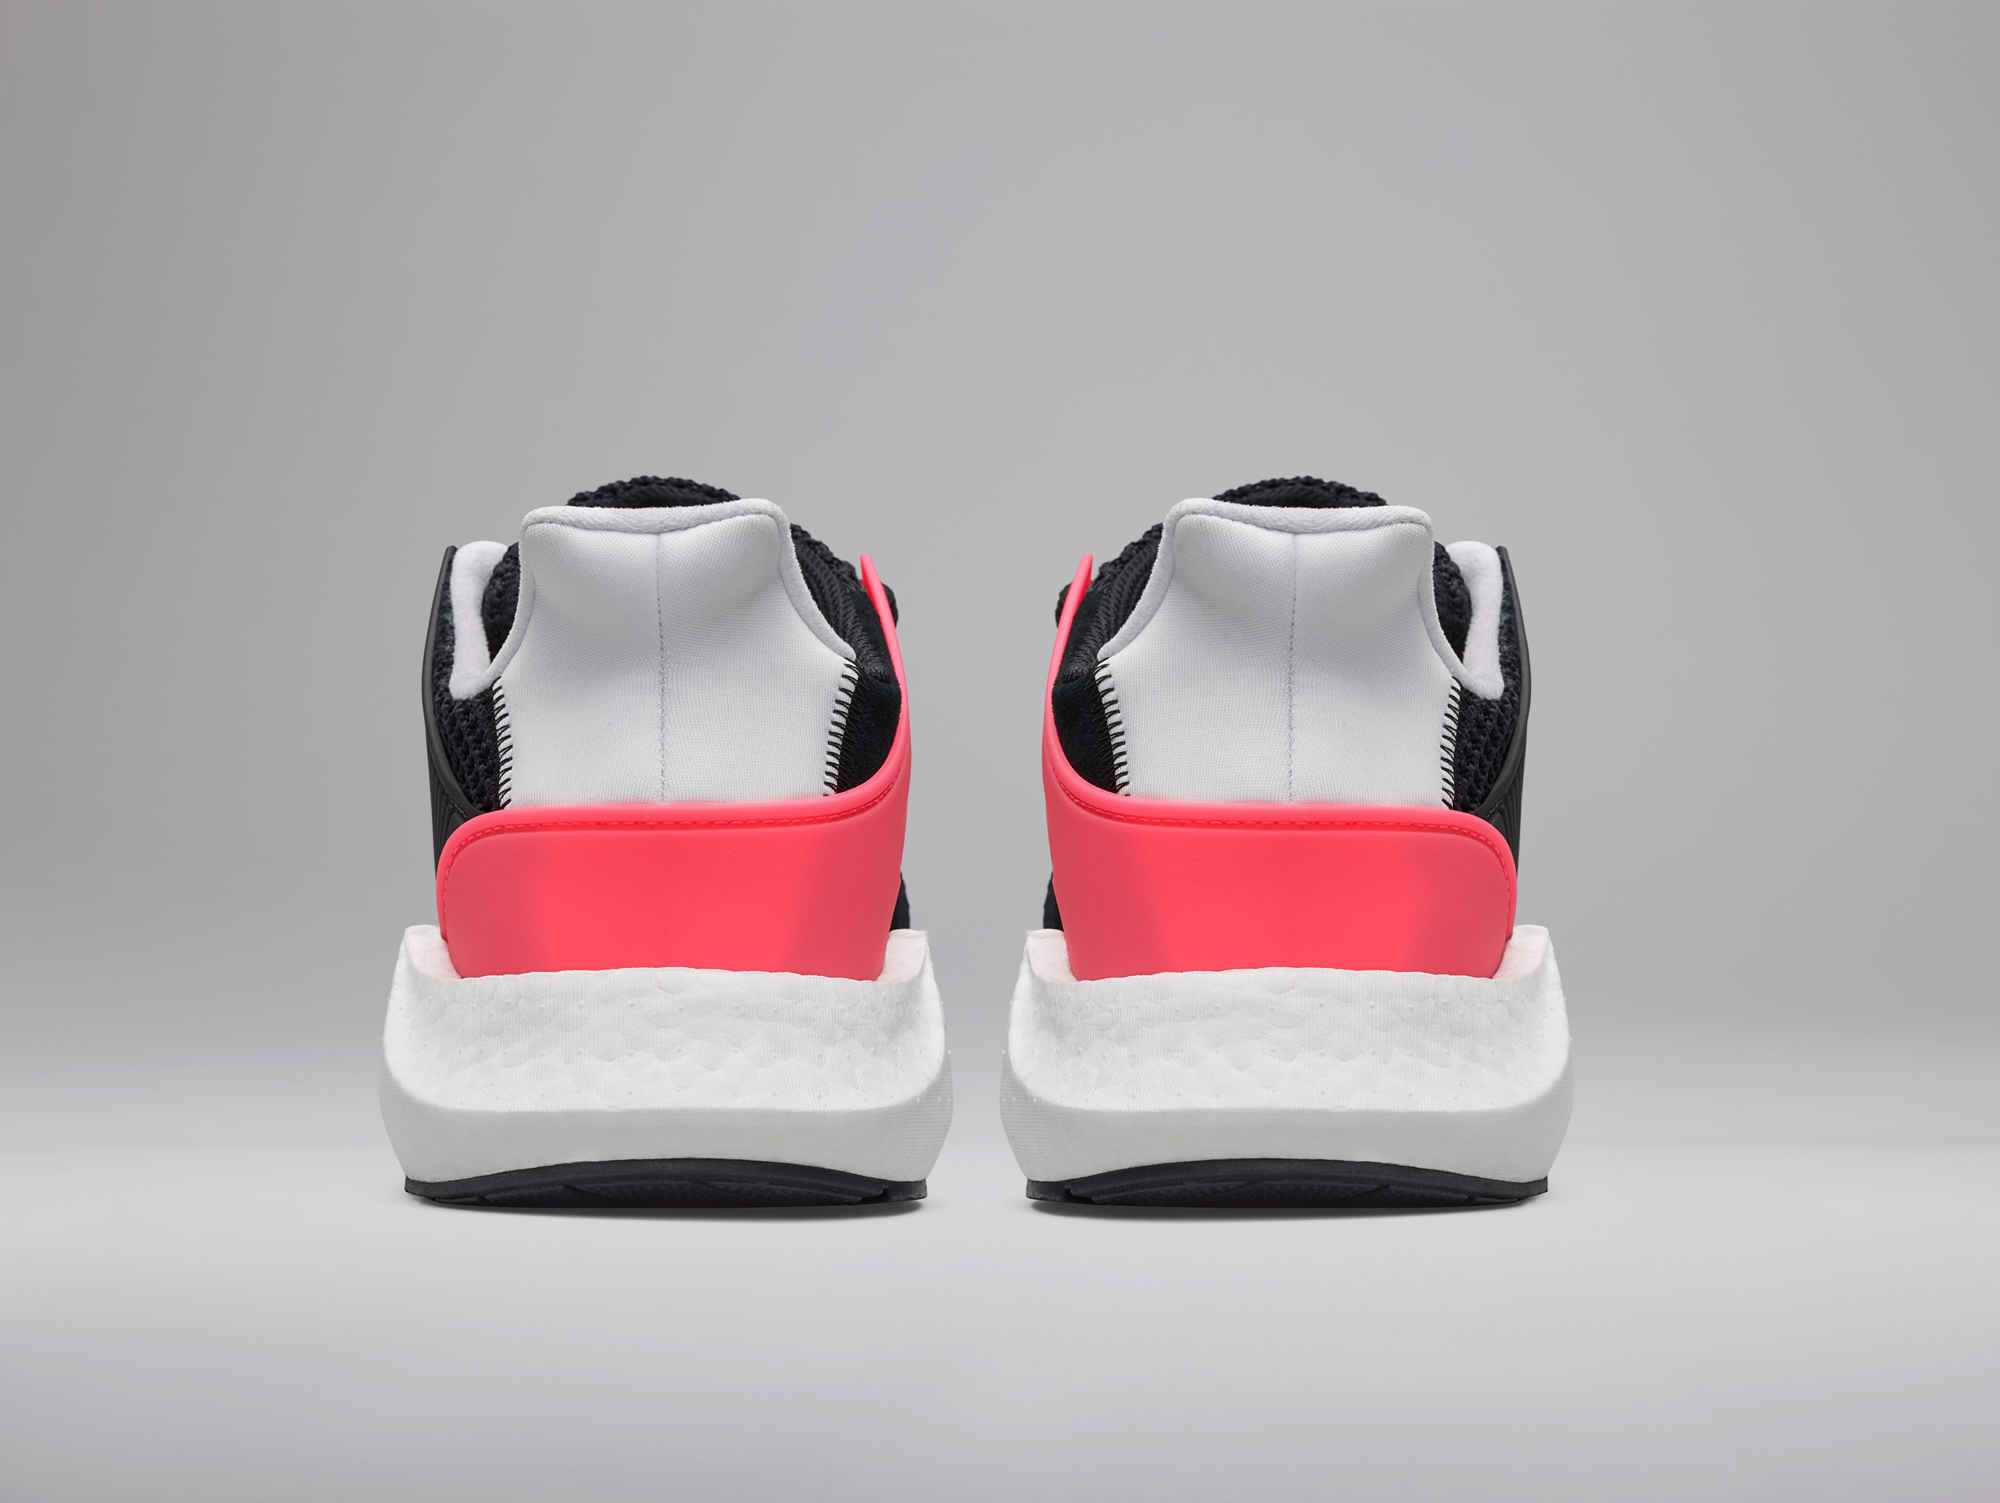 Adidas EQT - The Sneaker One Blog